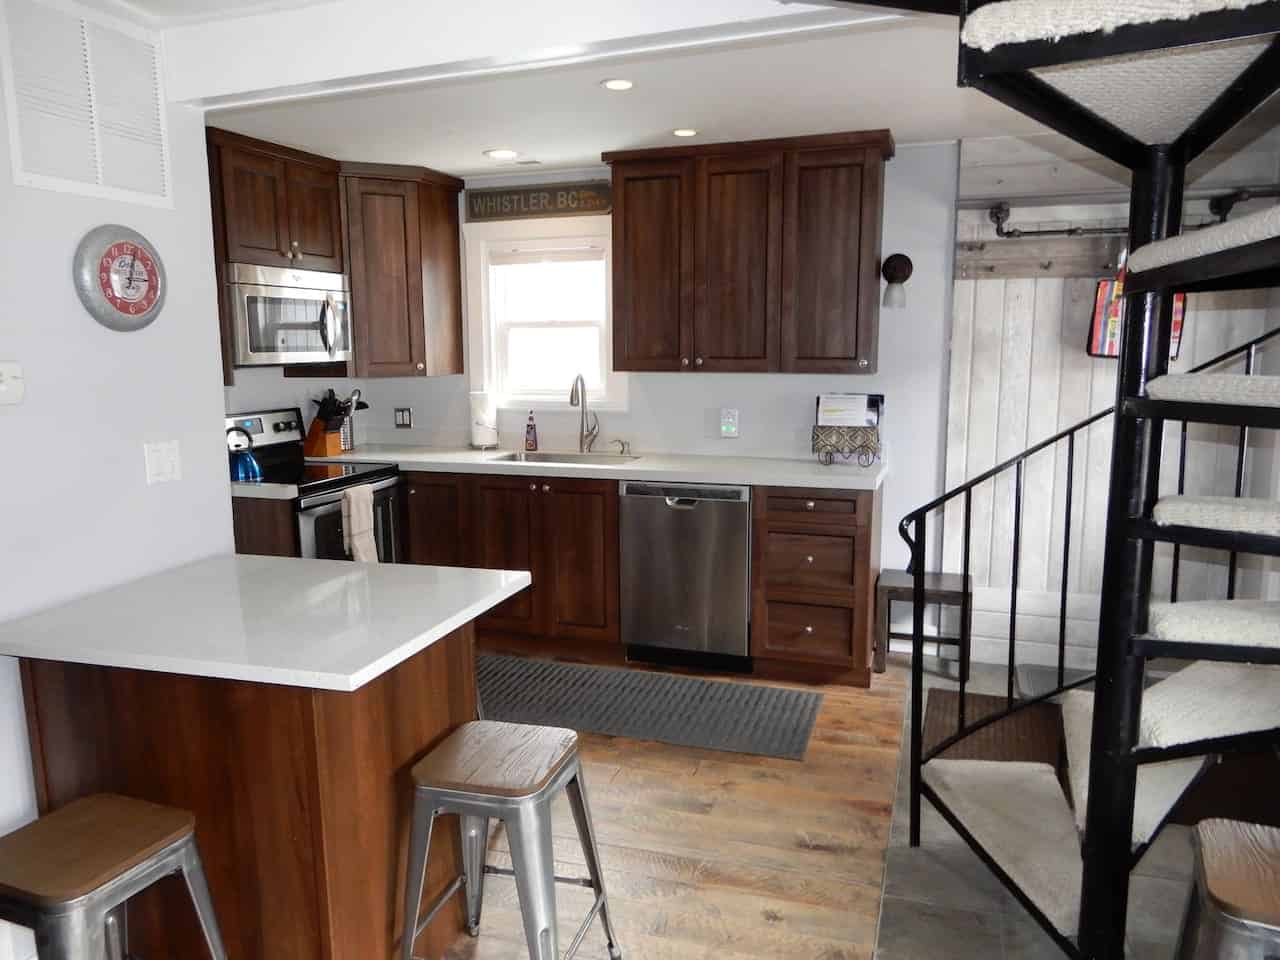 Image of Airbnb rental in Park City